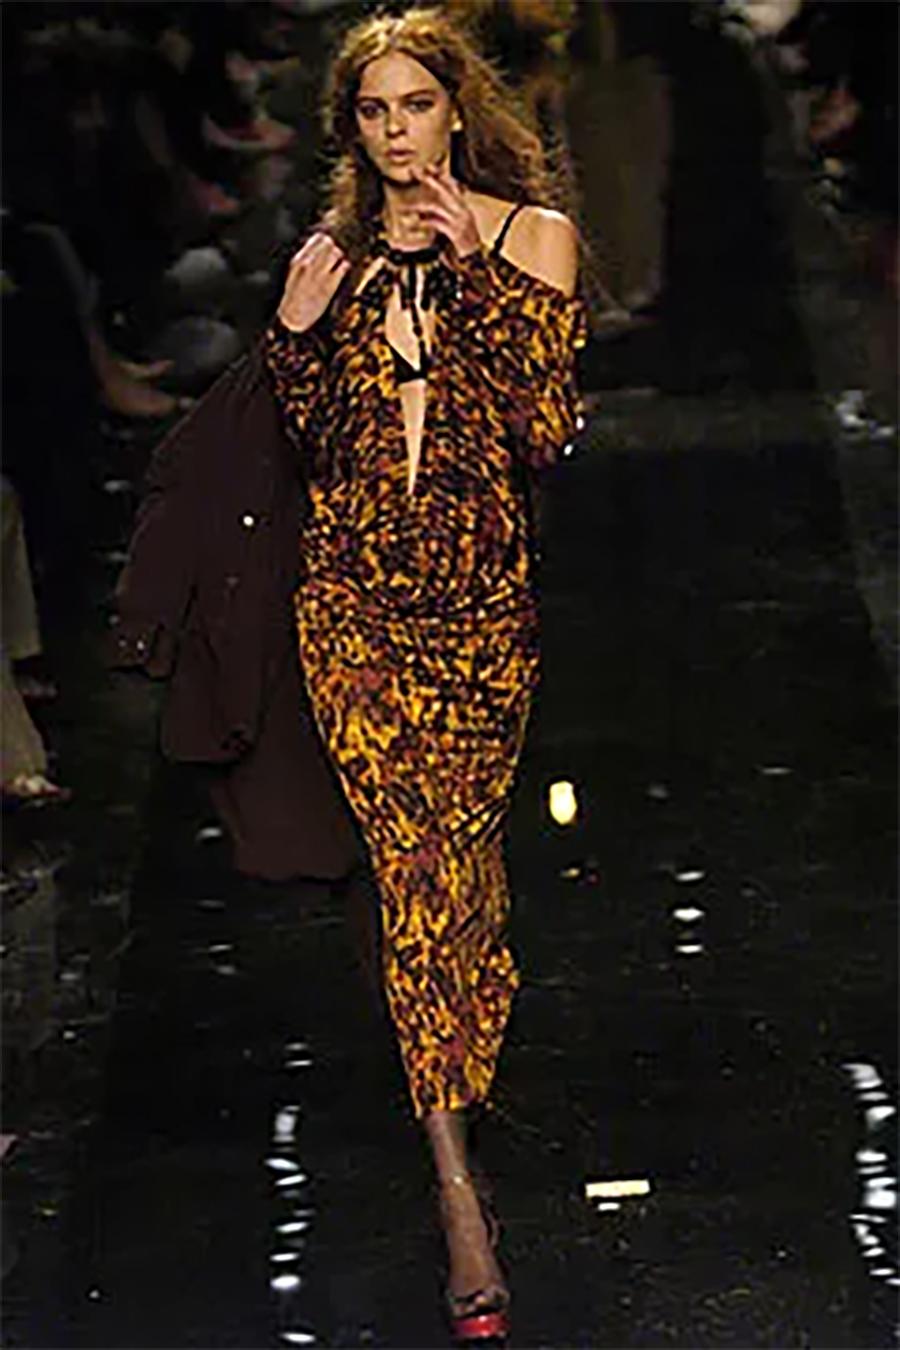 S/S 2005 Jean Paul Gaultier abstract tortoiseshell print dress. Long sleeve gown with dramatic drape at hips. Tortoiseshell print bakelite halter detail. Minorly stretchy jersey fabric. As seen on the runway.